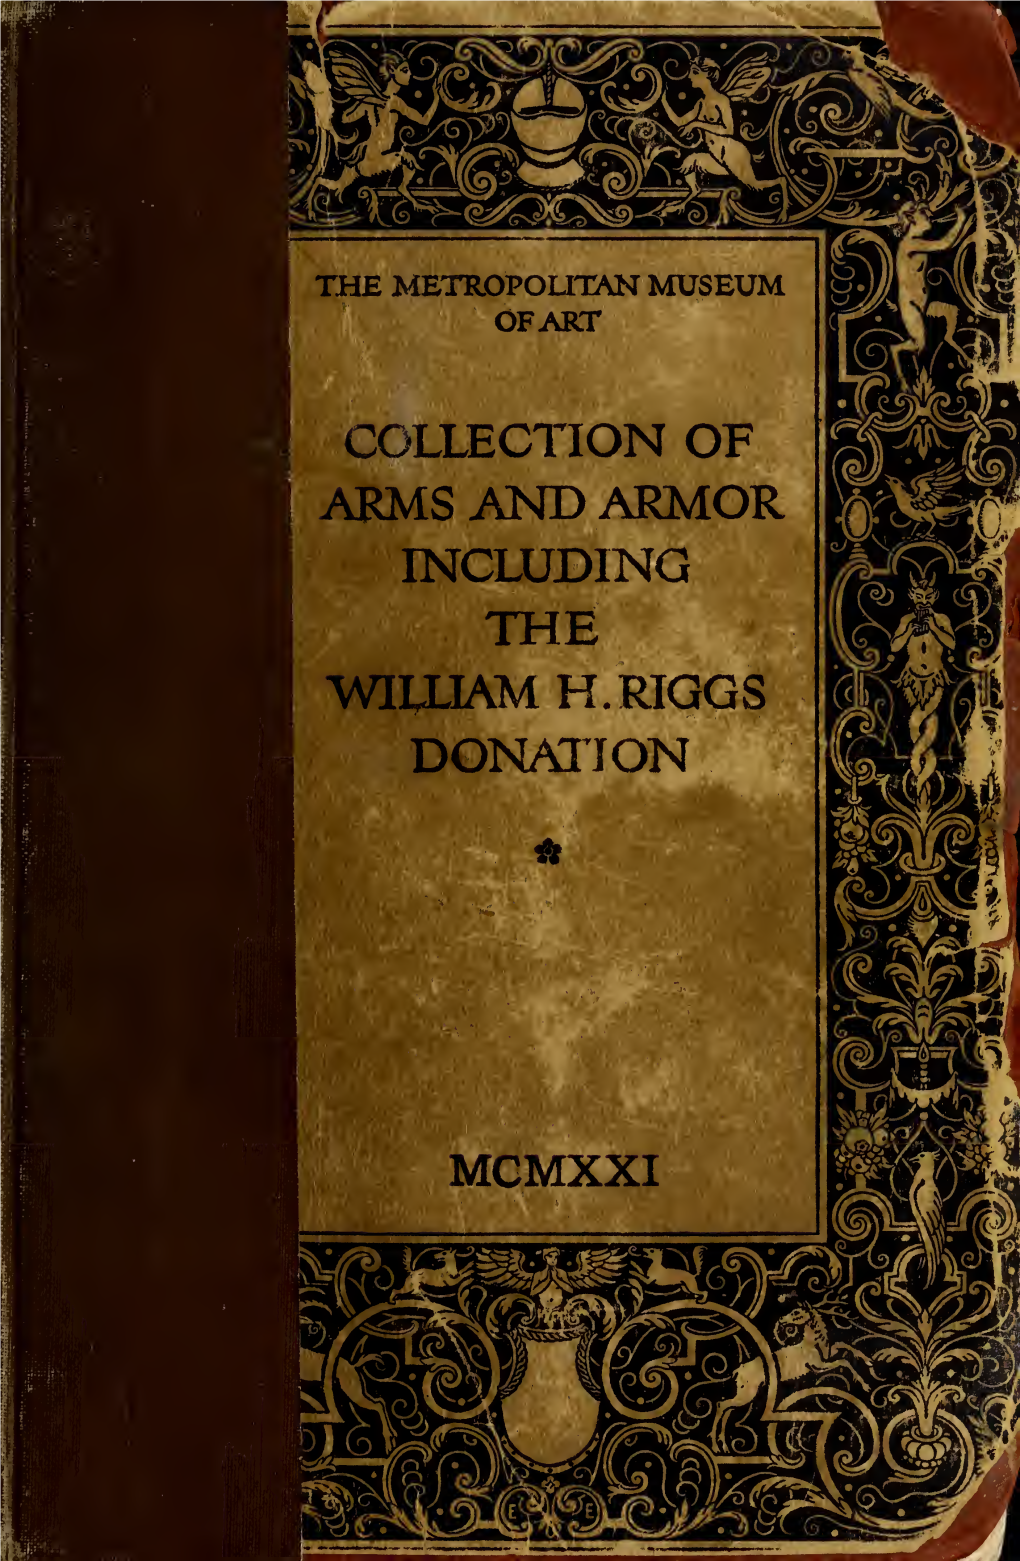 Including the William H. Riggs Collection by Bashford Dean